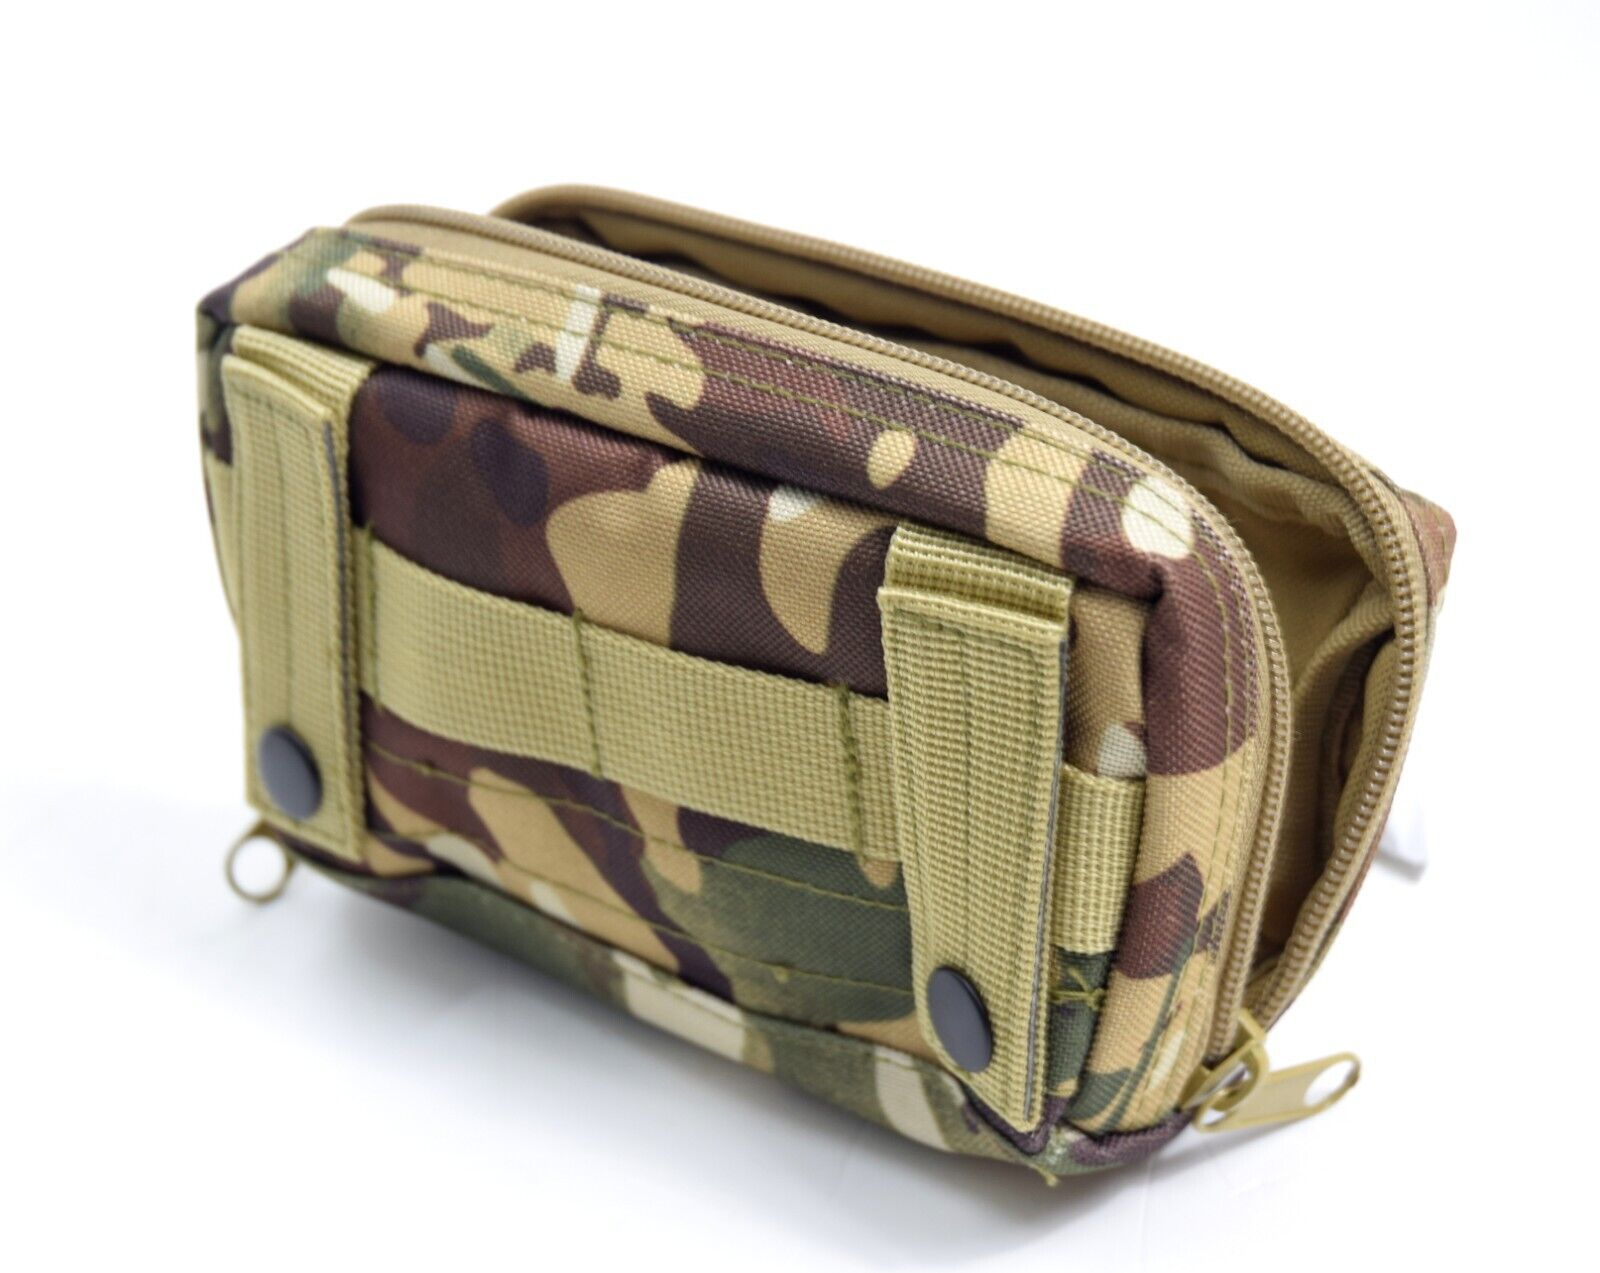 British Army Style MTP CO2 Holder Pouch Horizontal Utility Pouch 12g Capsule Gas